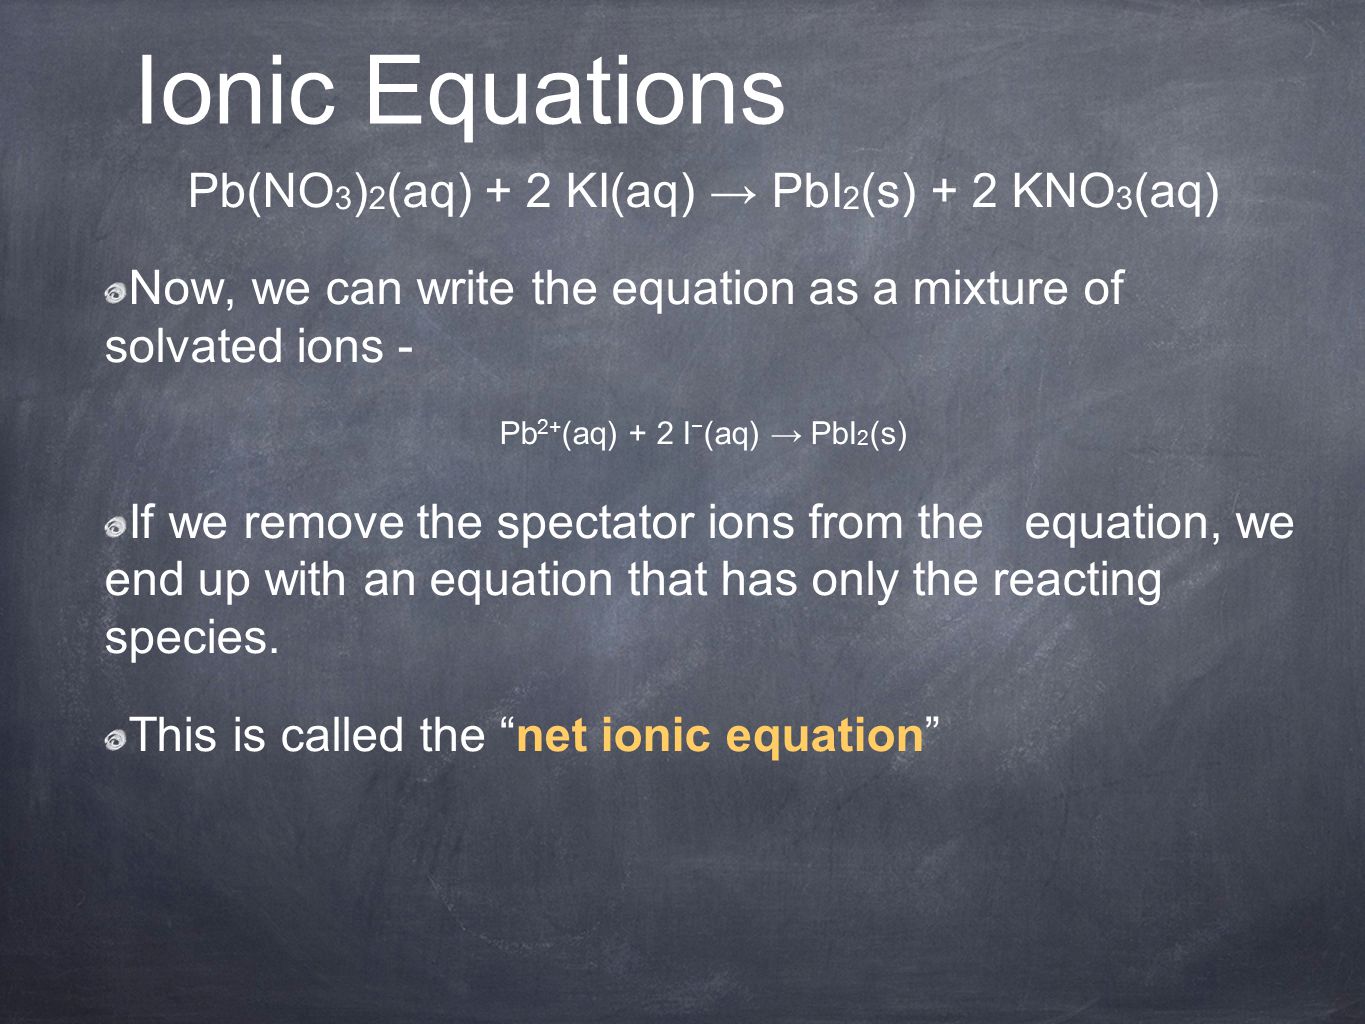 Pb(NO 3 ) 2 (aq) + 2 KI(aq) → PbI 2 (s) + 2 KNO 3 (aq) Now, we can write the equation as a mixture of solvated ions - Pb 2+ (aq) + 2 I − (aq) → PbI 2 (s) If we remove the spectator ions from the equation, we end up with an equation that has only the reacting species.